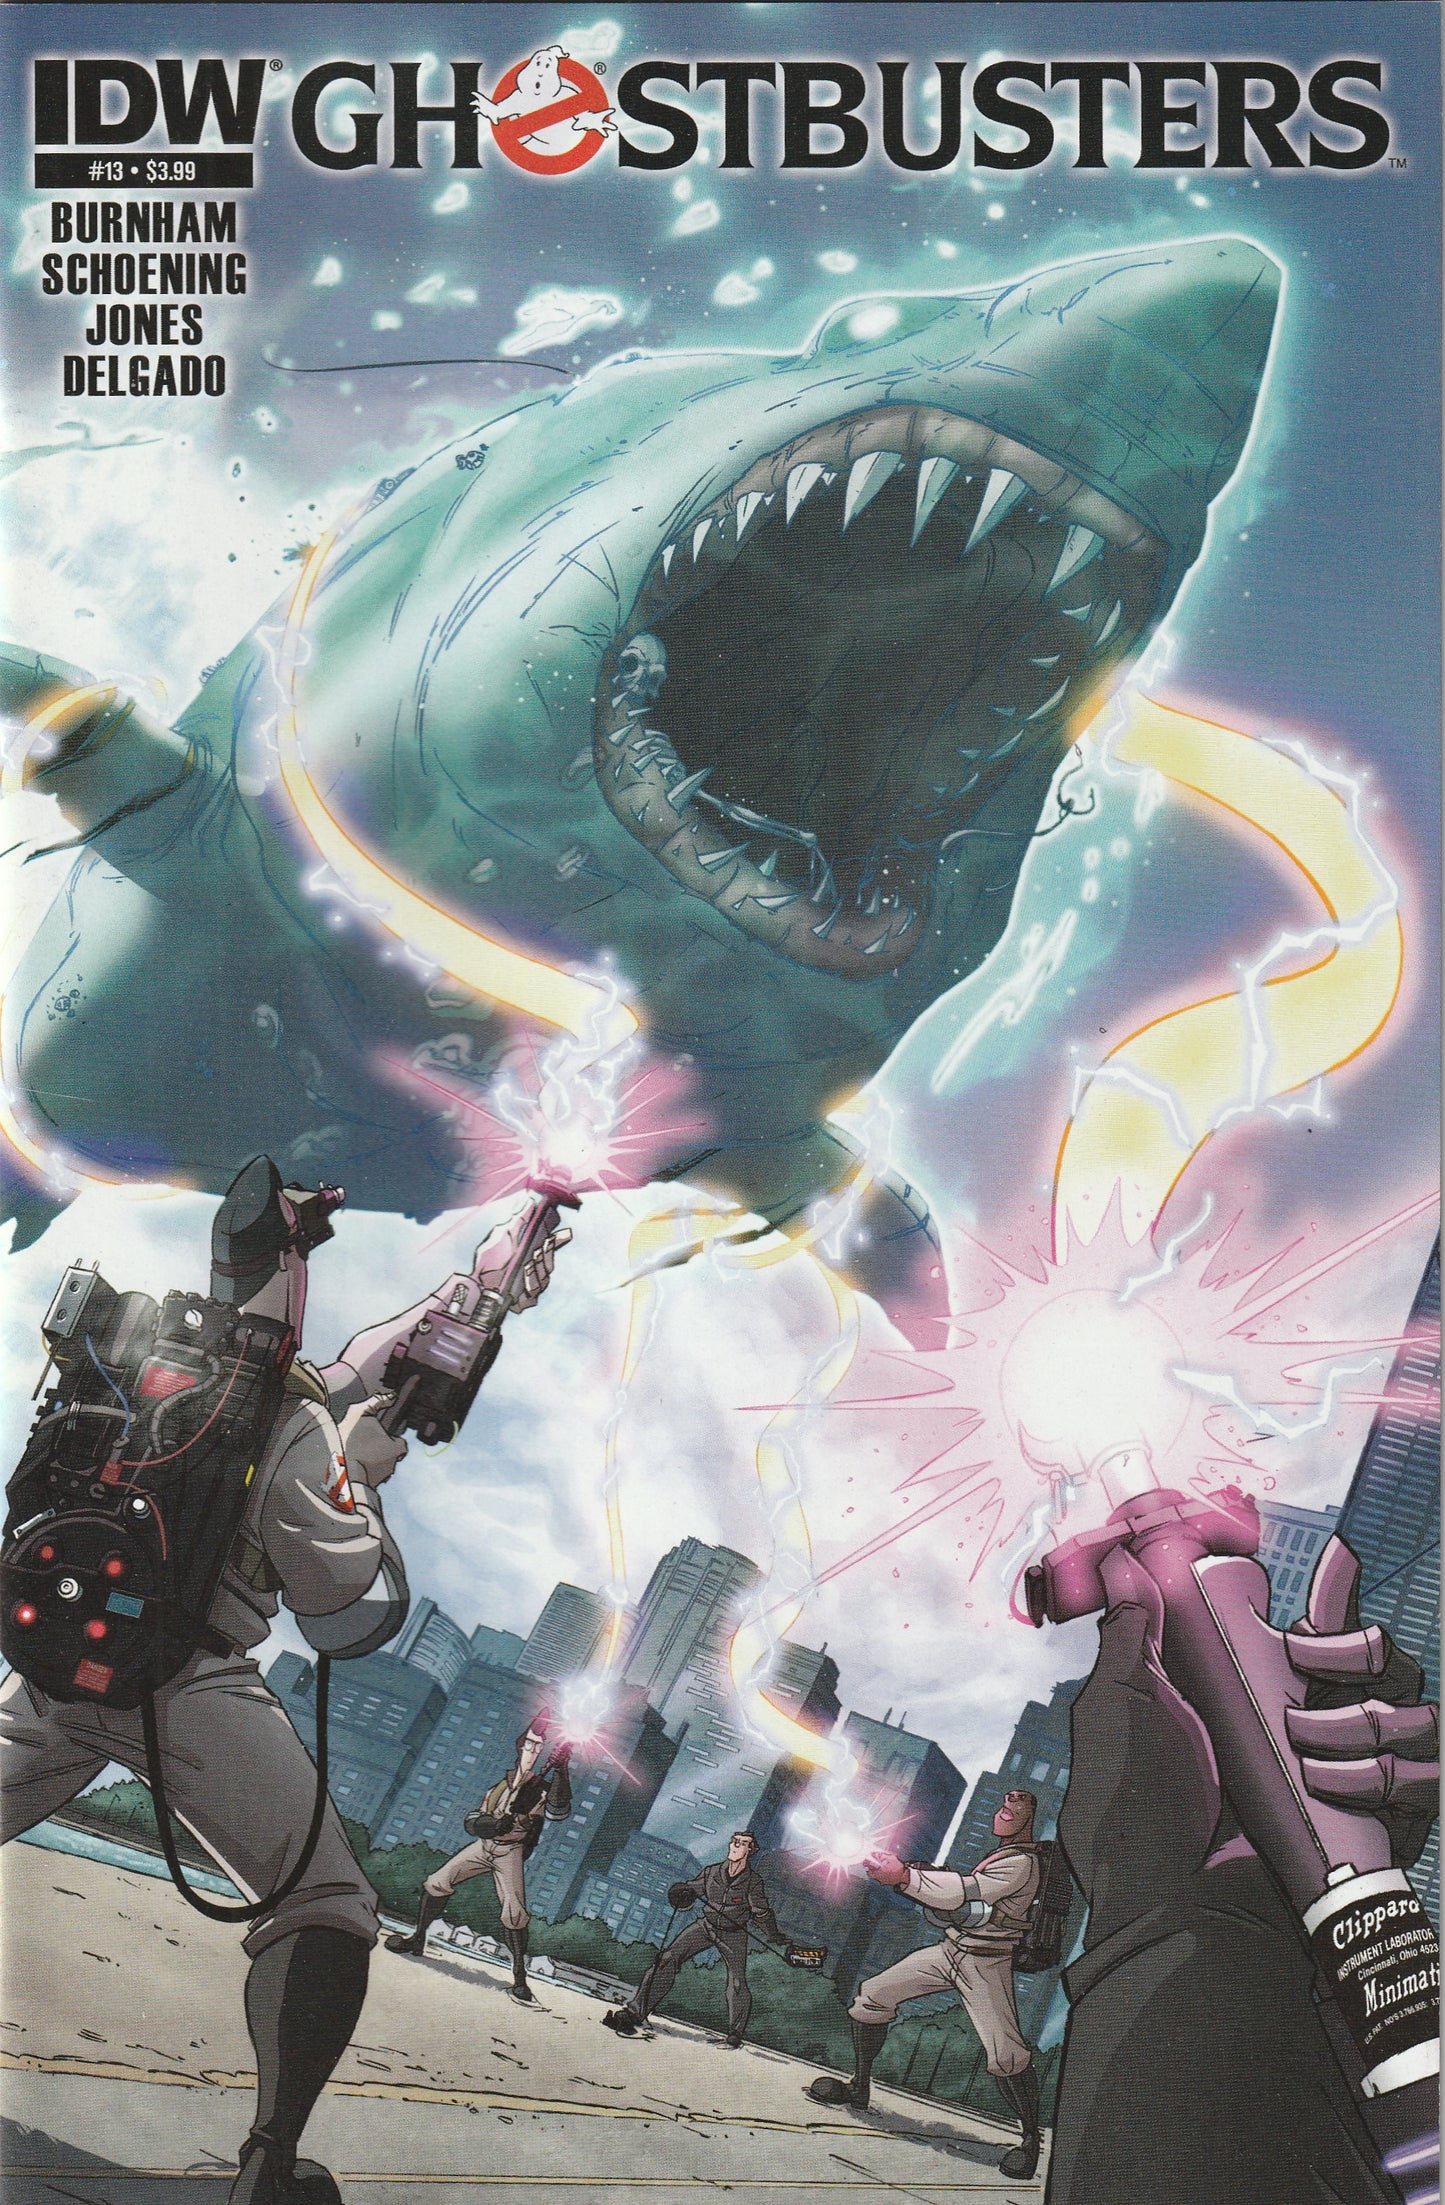 Ghostbusters #13 (2012) - Cover A Dan Schoening Cover